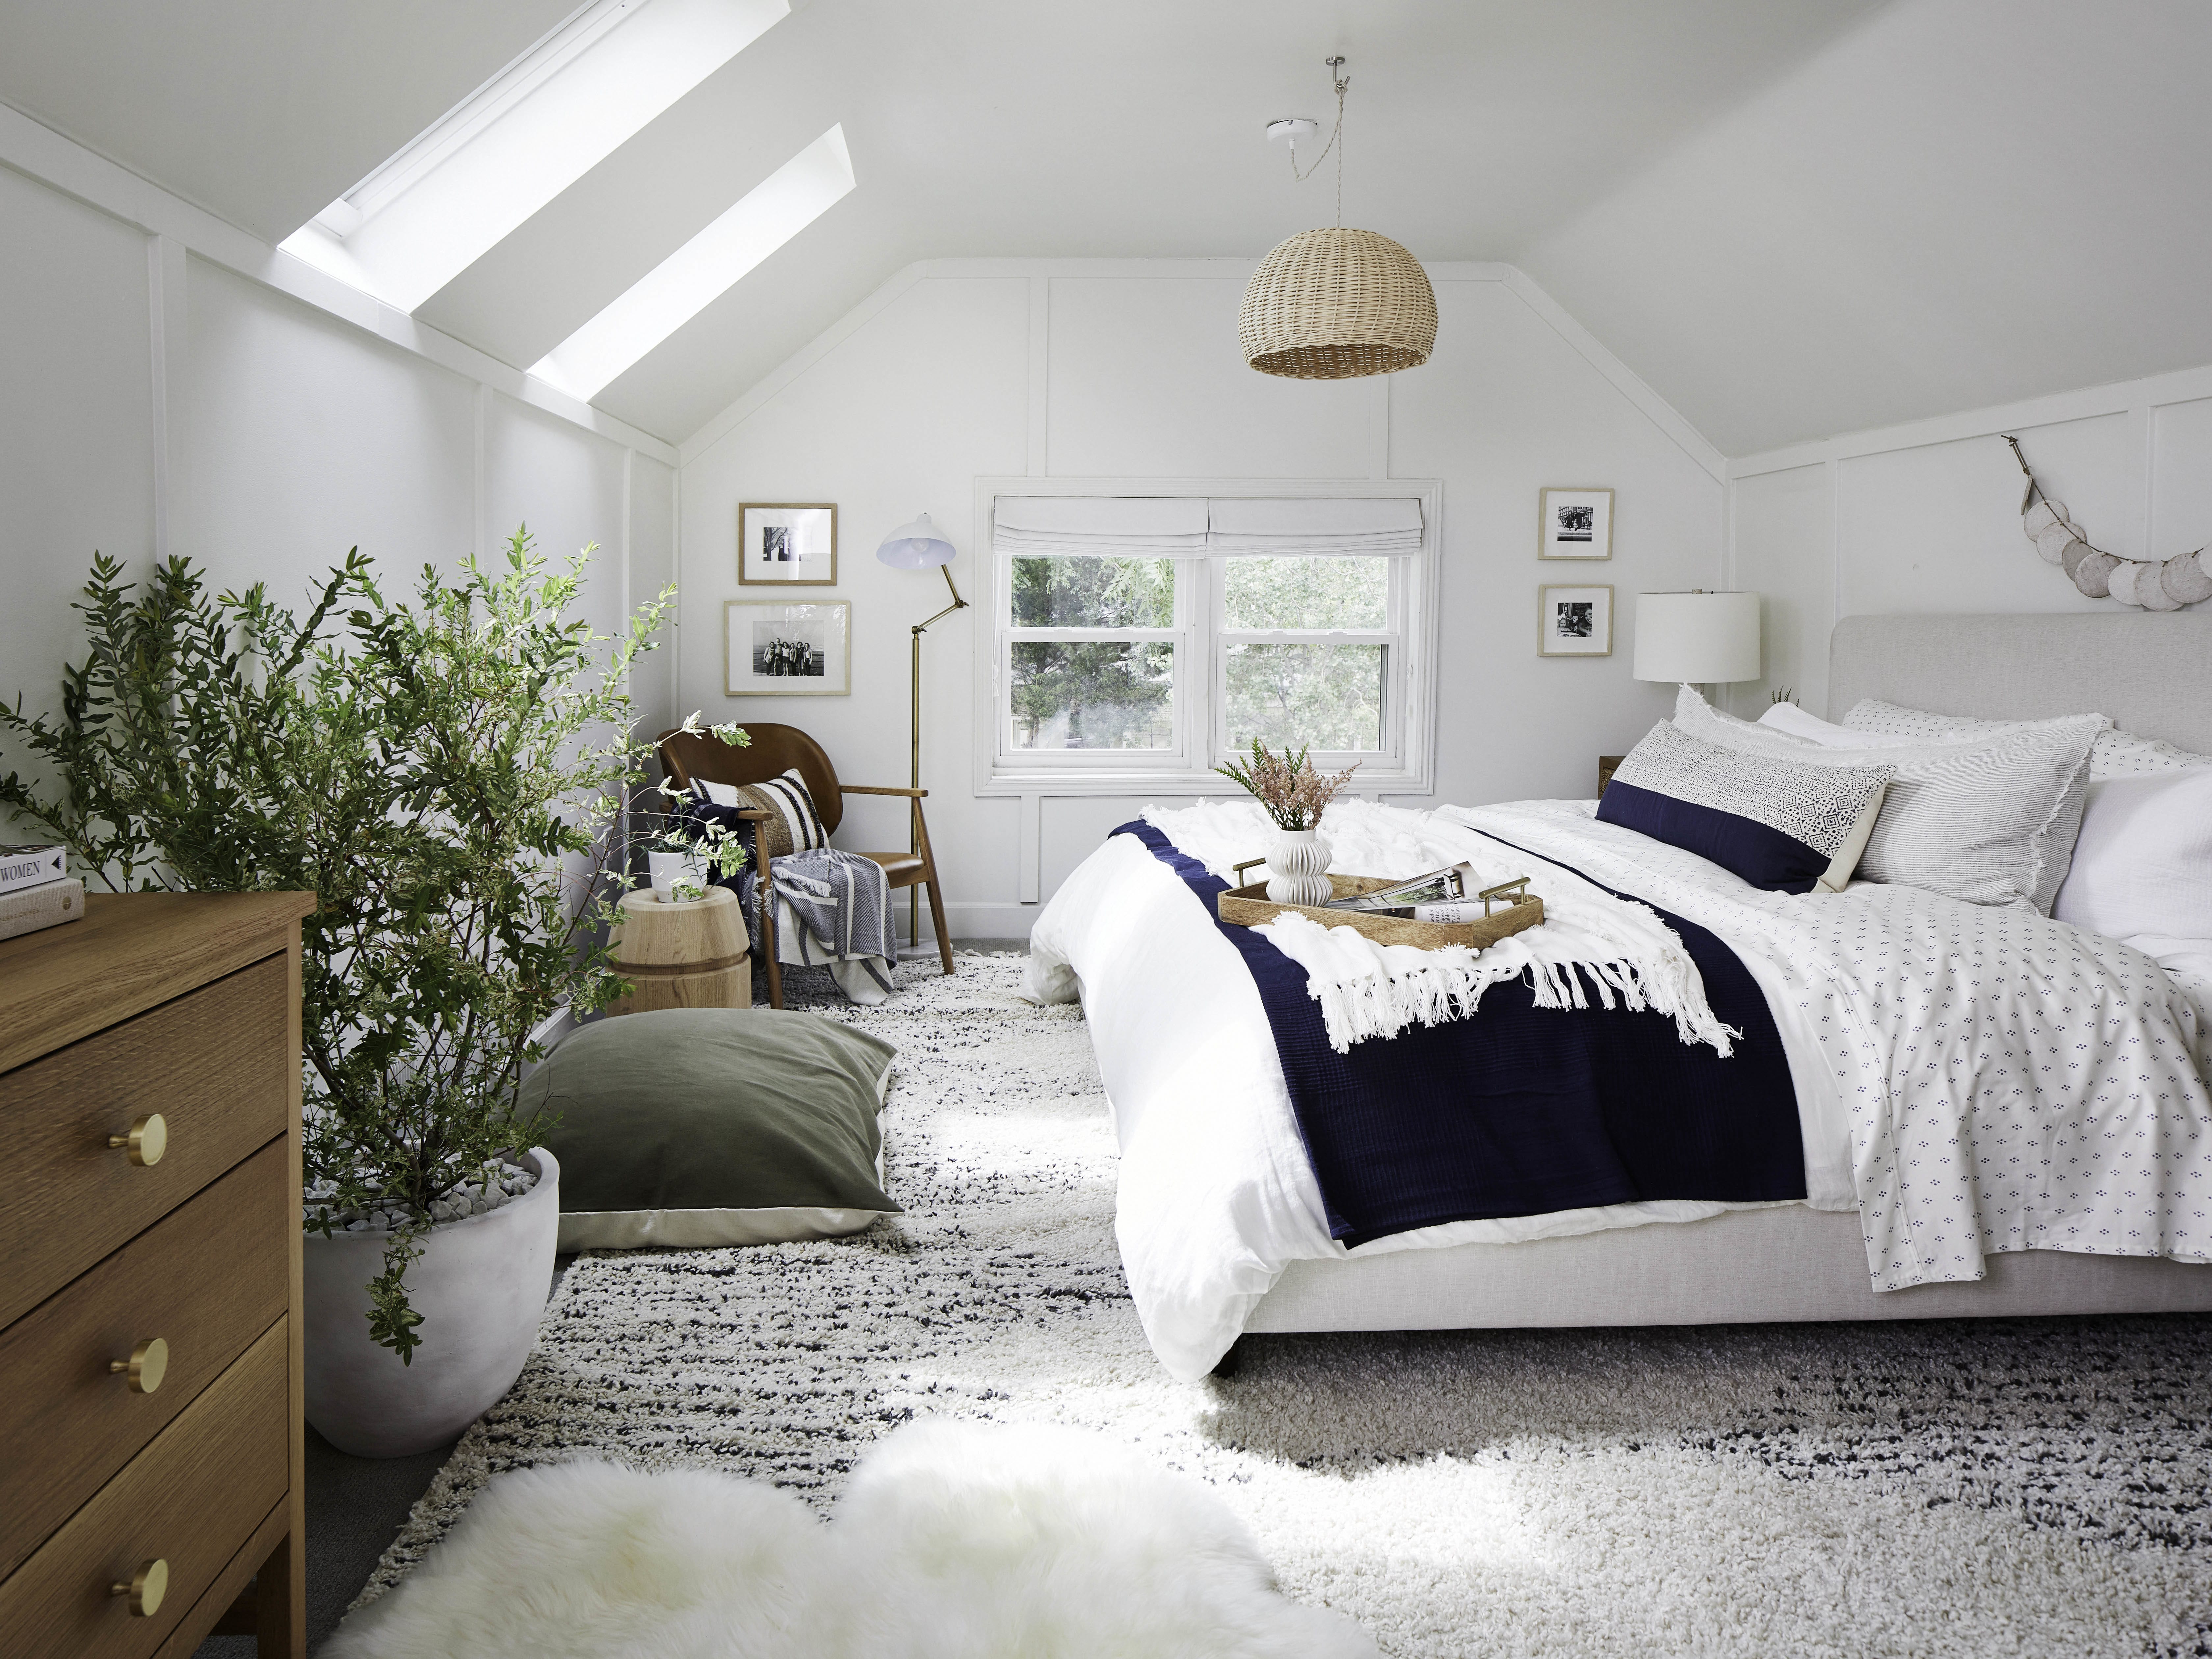 Attic bedroom with two skylights and a blue and white color scheme